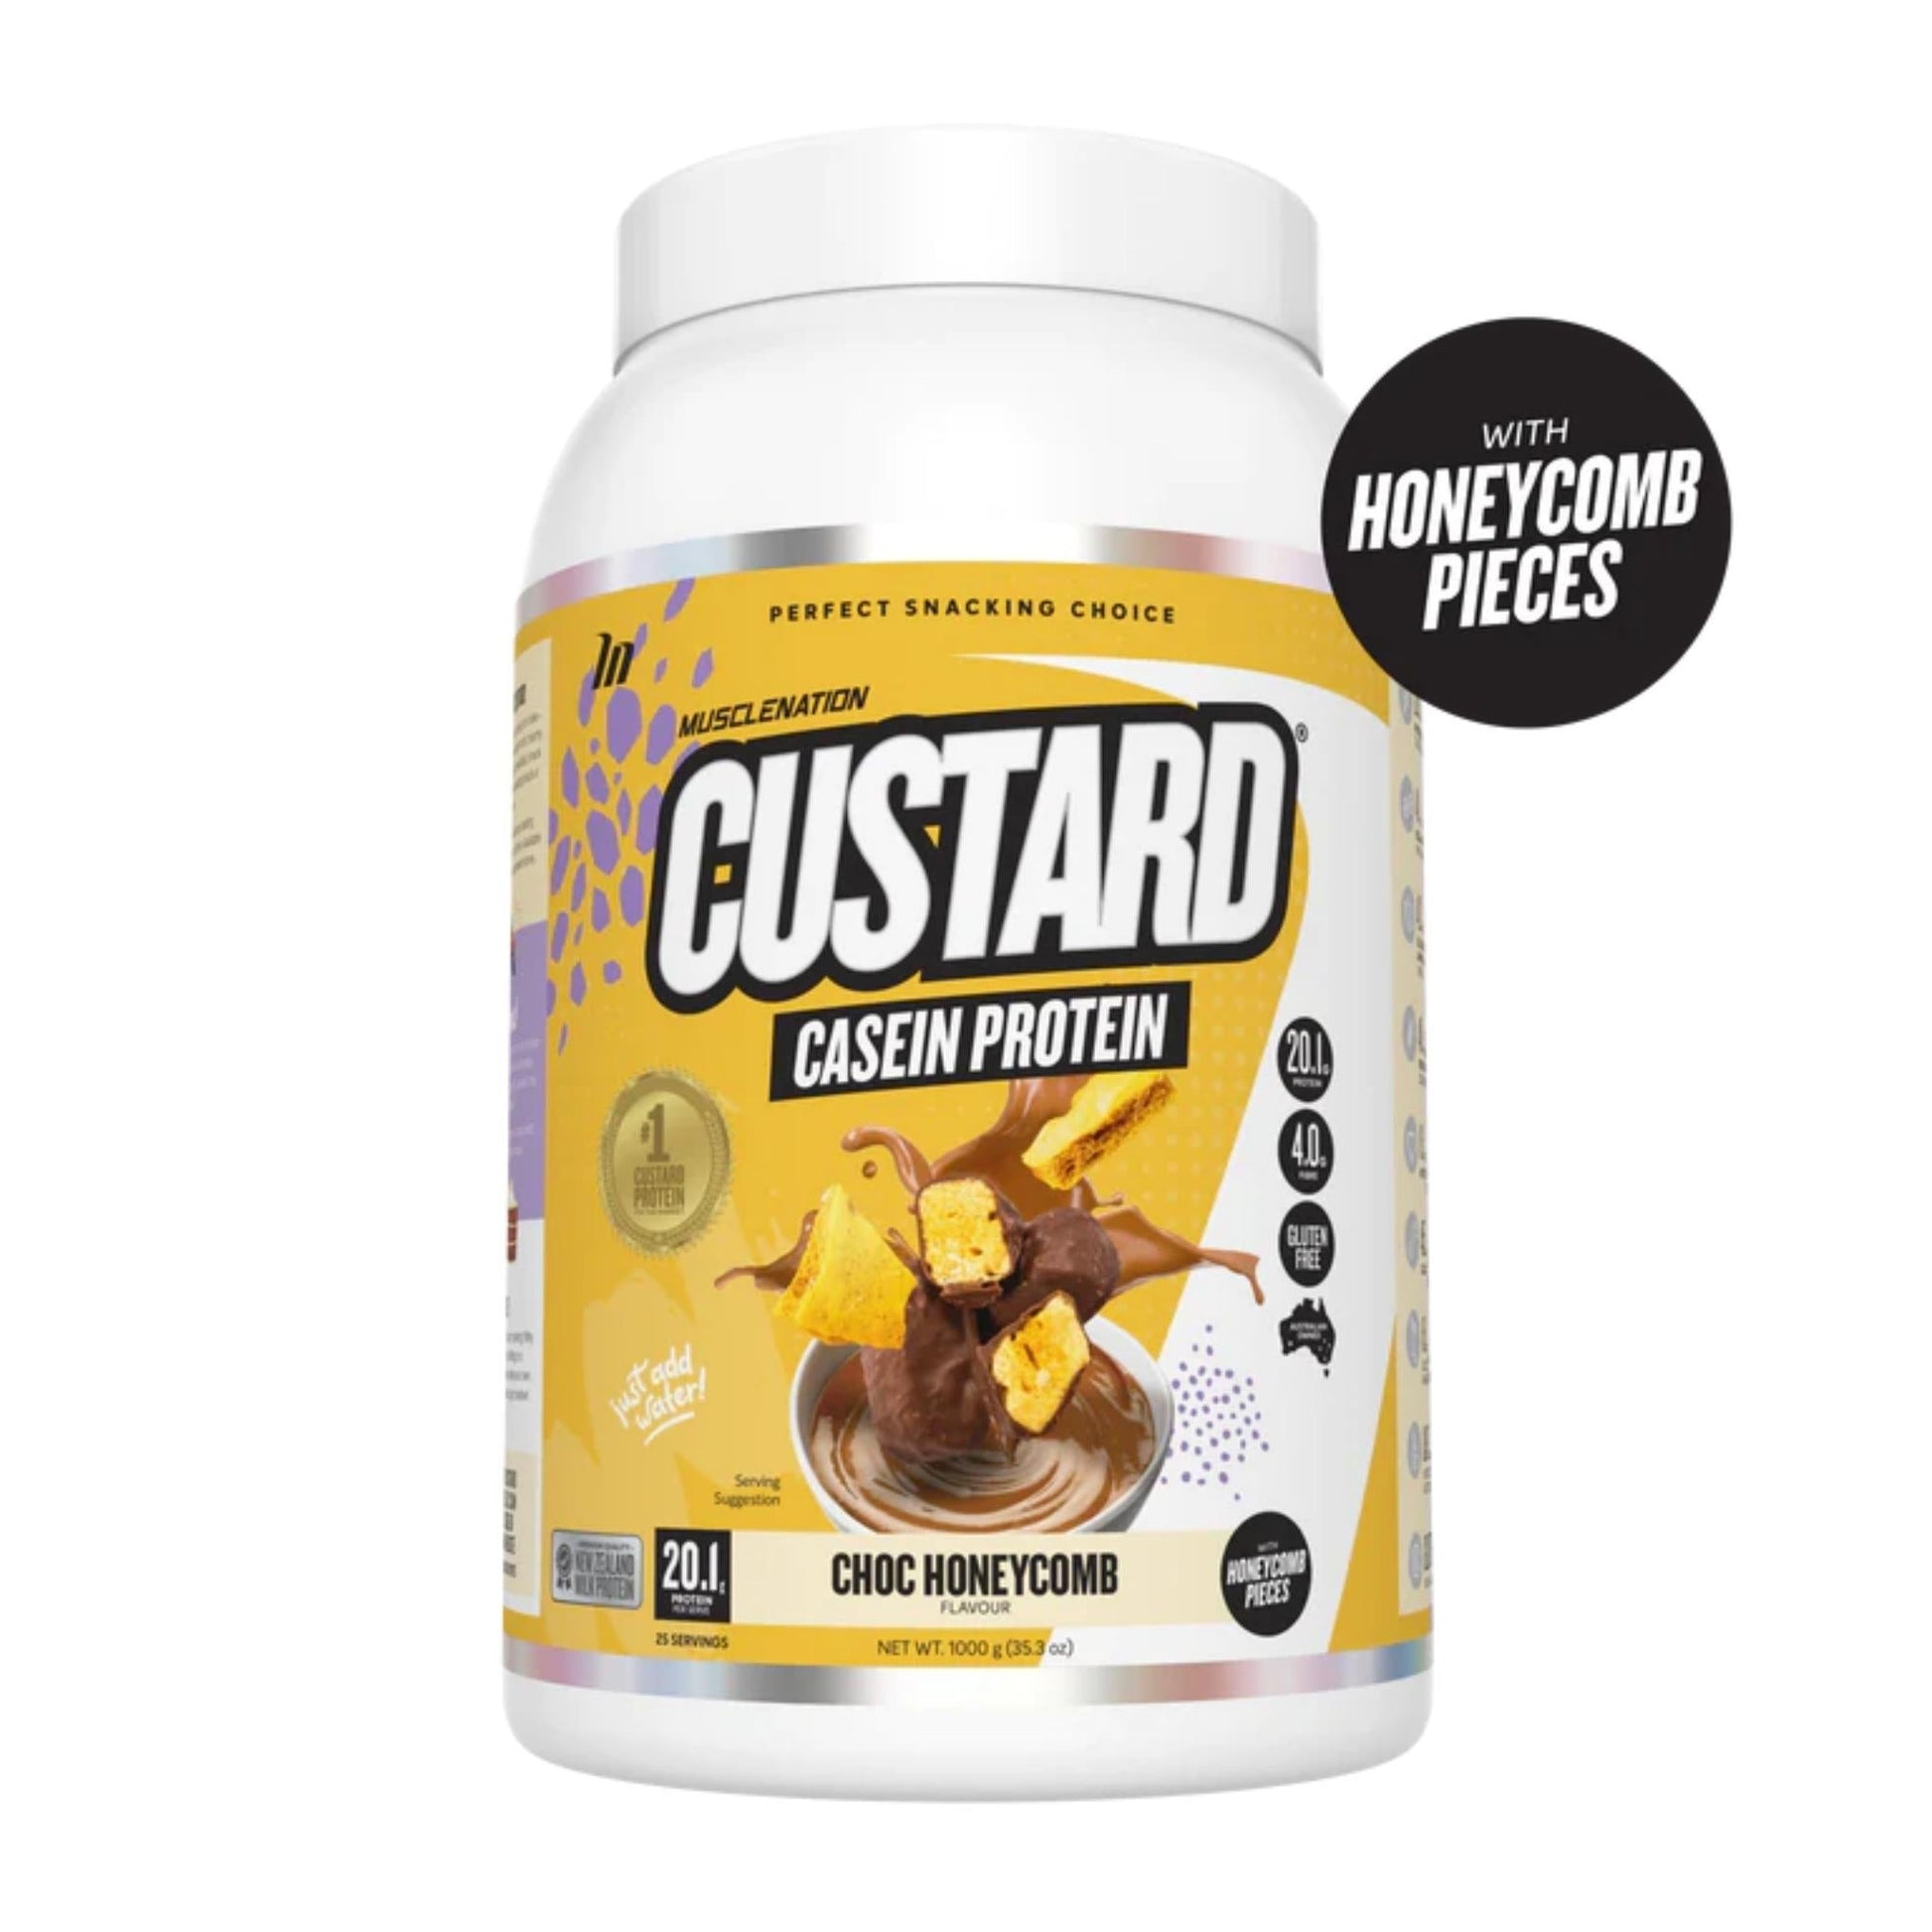 Muscle Nation - Custard Casein Protein - Supplements - Choc Honeycomb - The Cave Gym